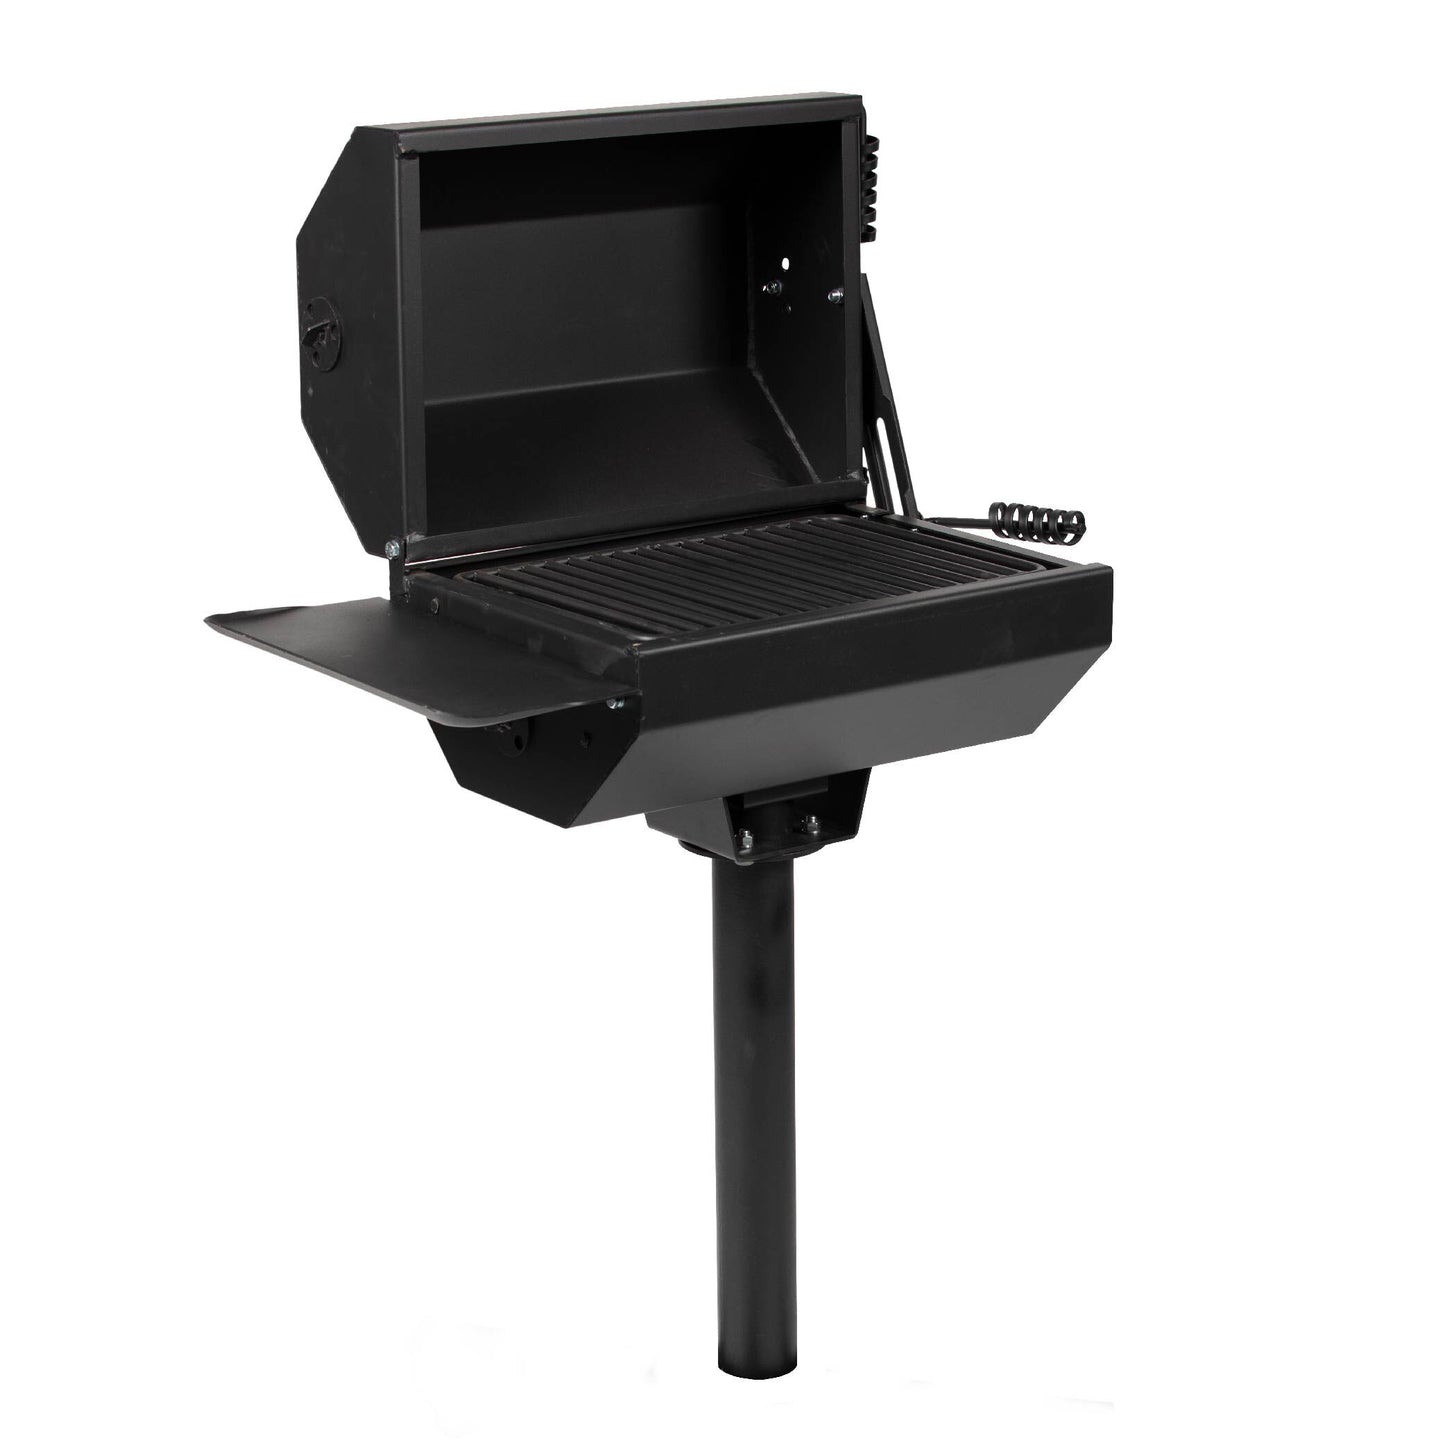 SCRATCH AND DENT - 390 Sq. In. Covered Park-Style Grill with Shelf - FINAL SALE - view 1